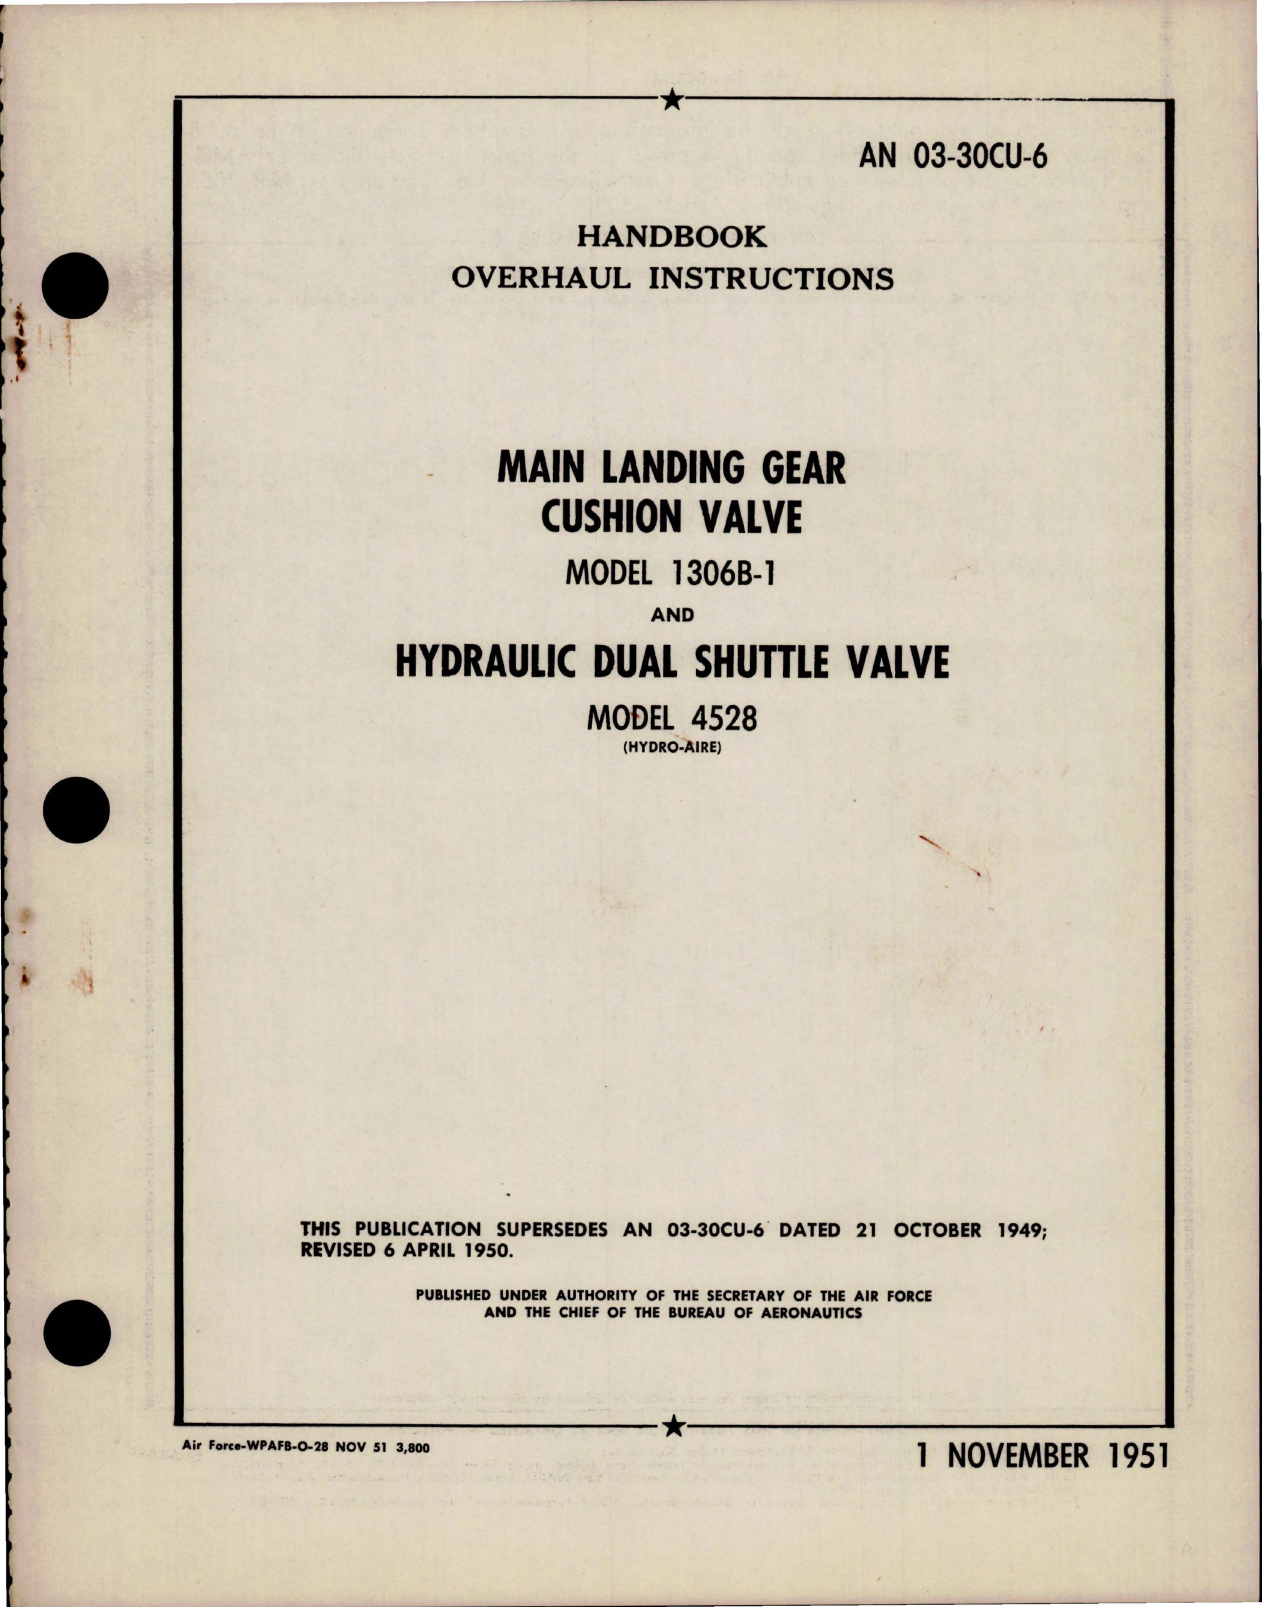 Sample page 1 from AirCorps Library document: Overhaul Instructions for Main Landing Gear Cushion Valve and Hydraulic Dual Shuttle Valve